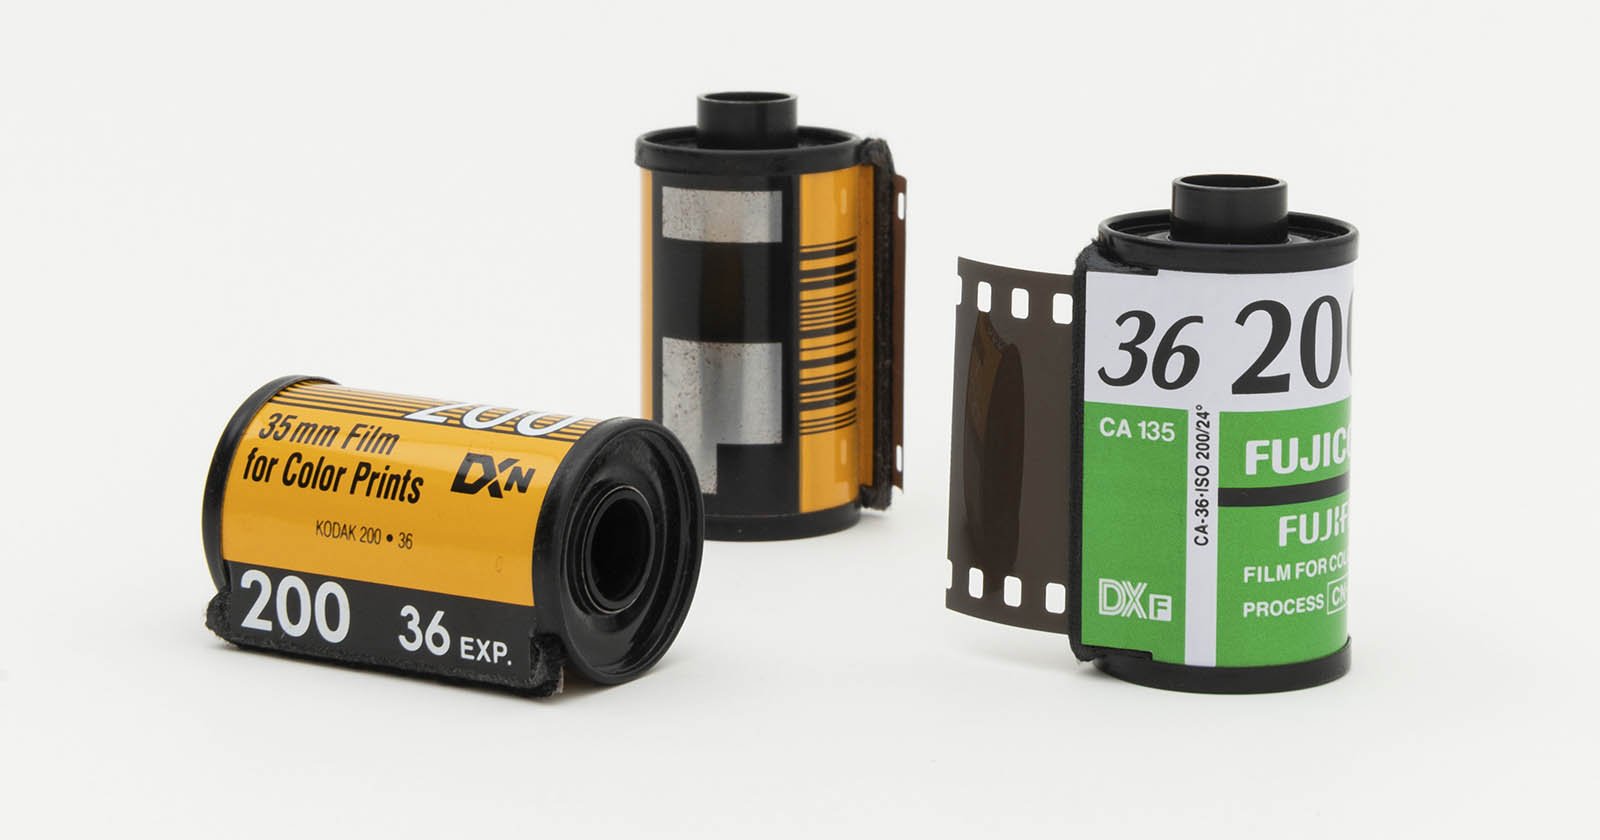 Where to Buy Film in 2024